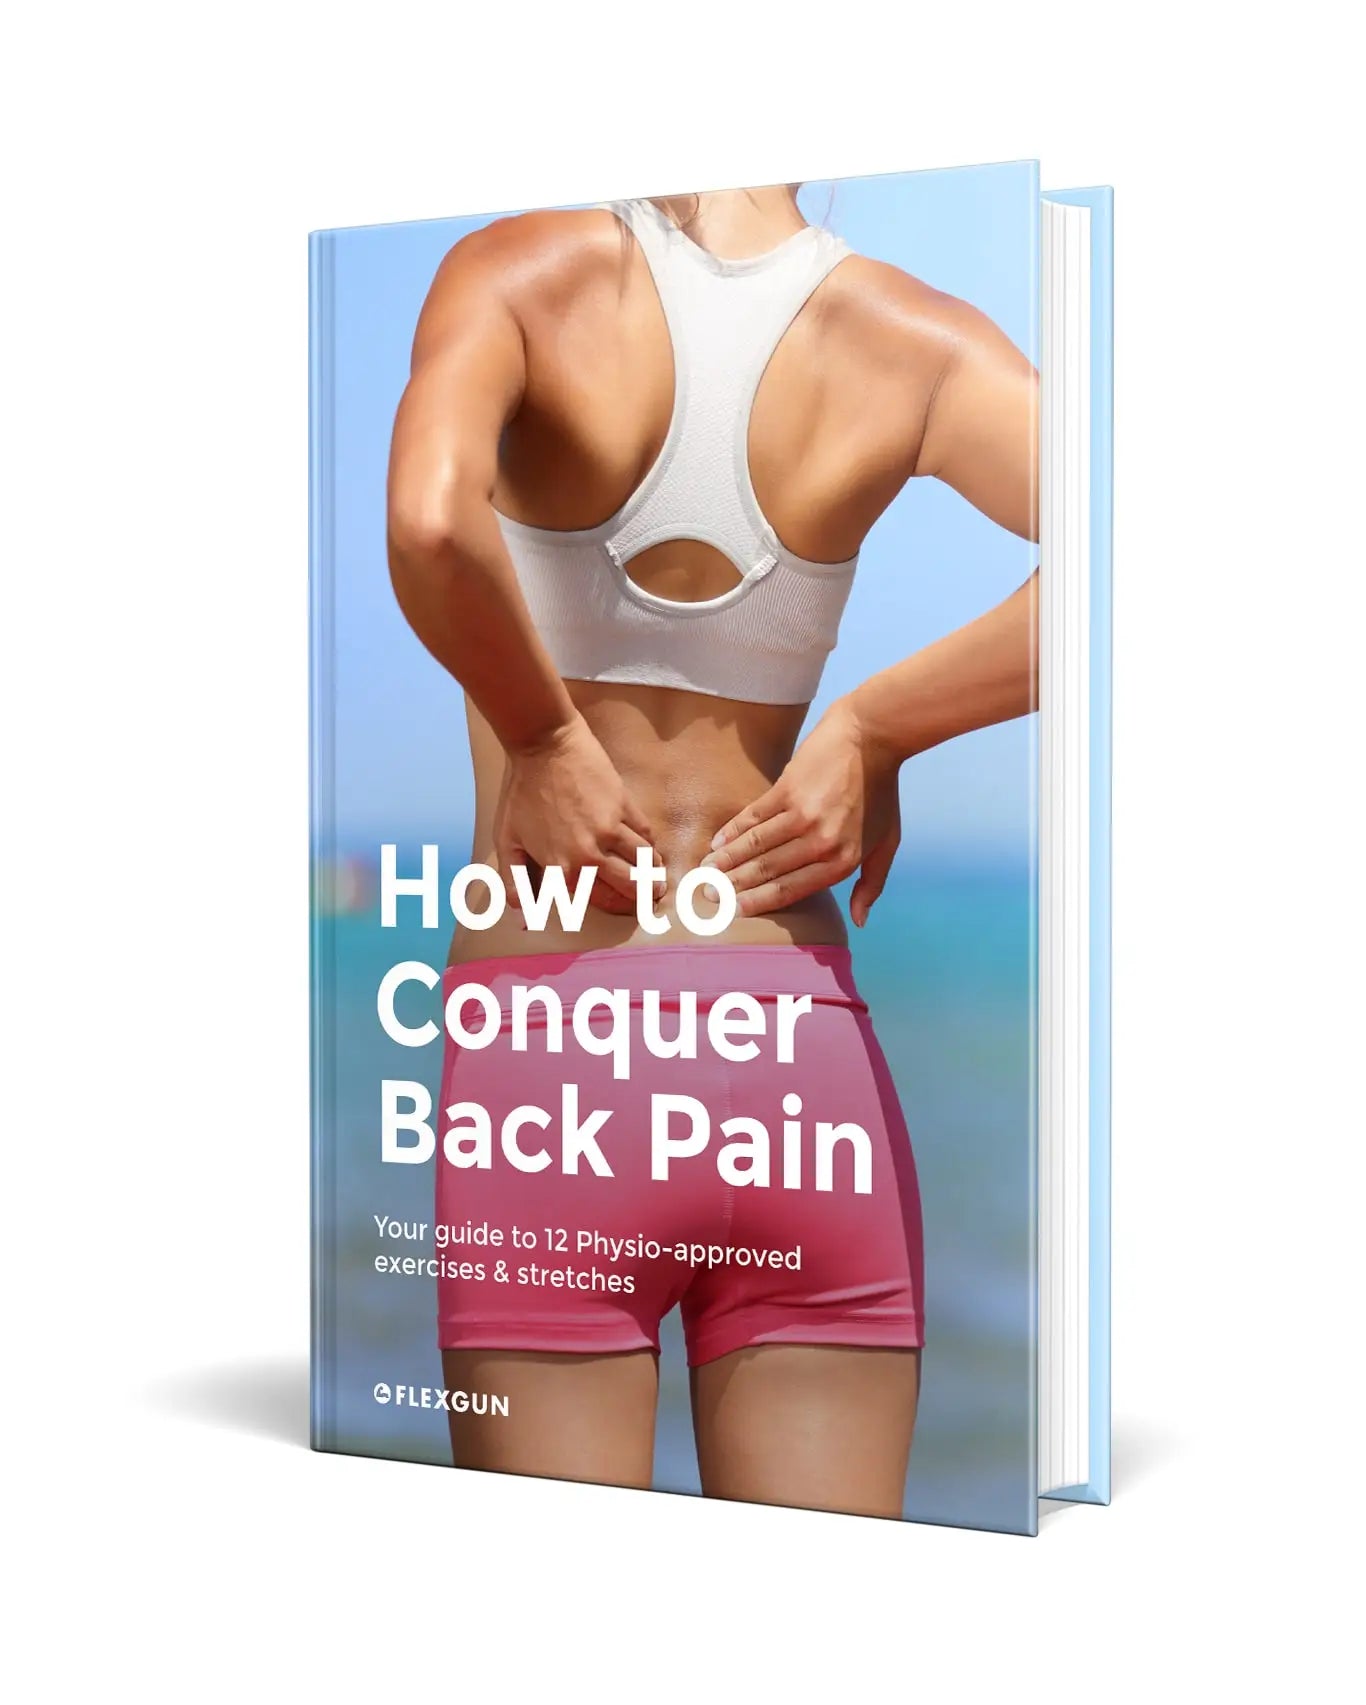 How to back pain relief